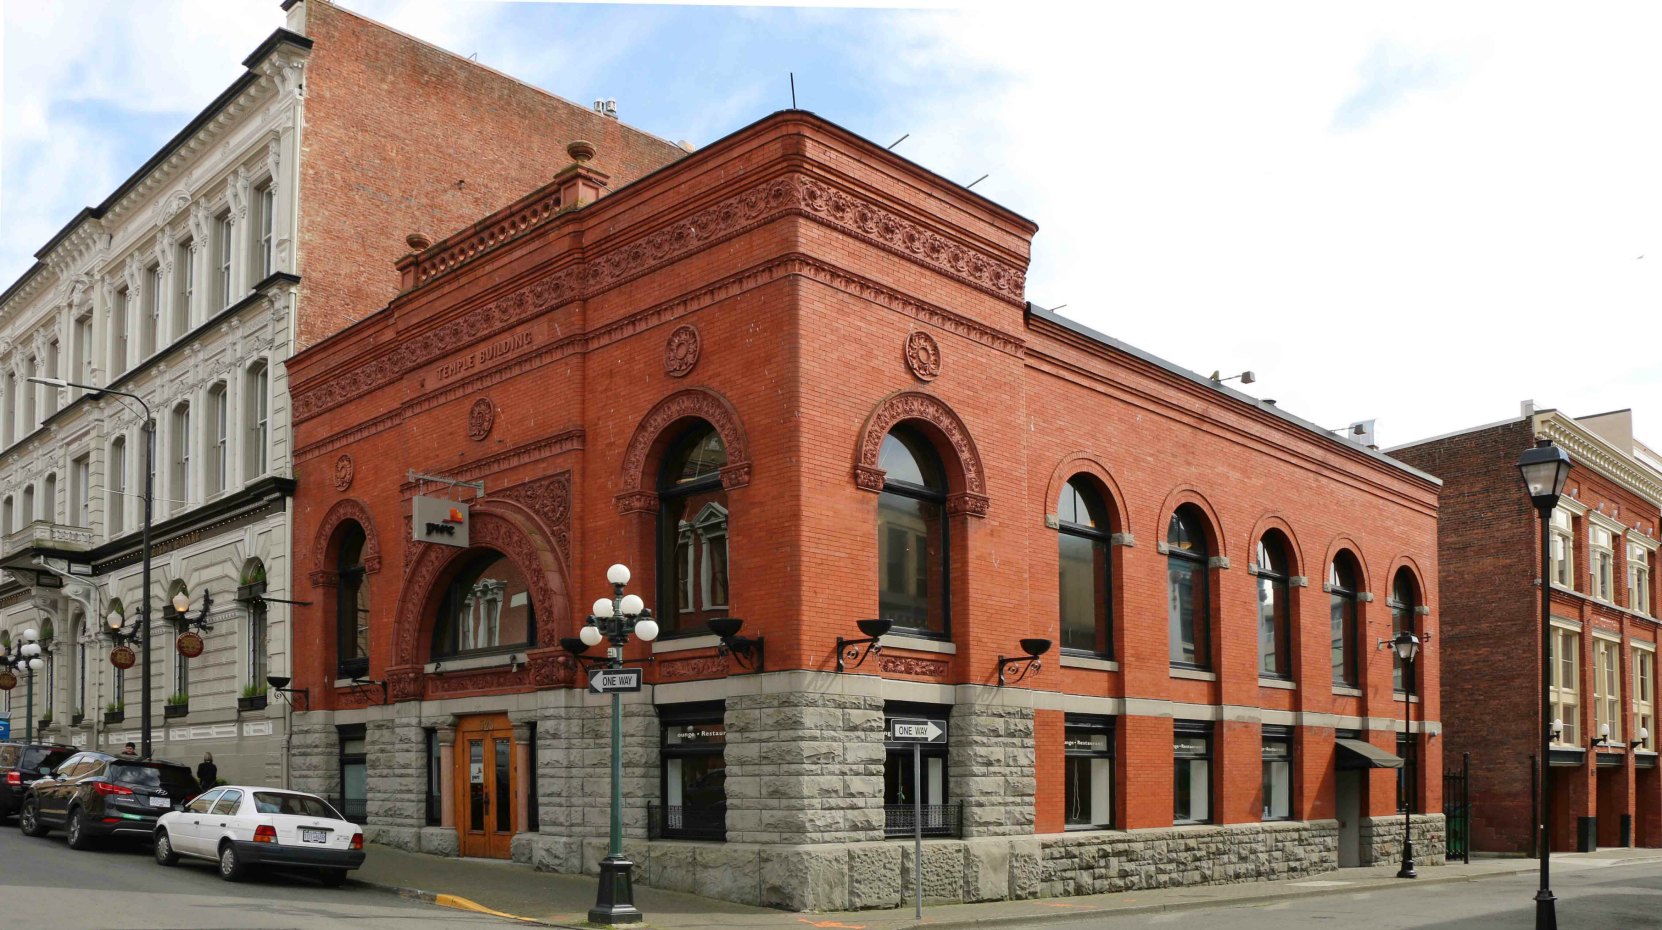 The Temple Building, 525 Yates Street, designed by architect Samuel Maclure (photo by Victoria Online Sightseeing Tours)